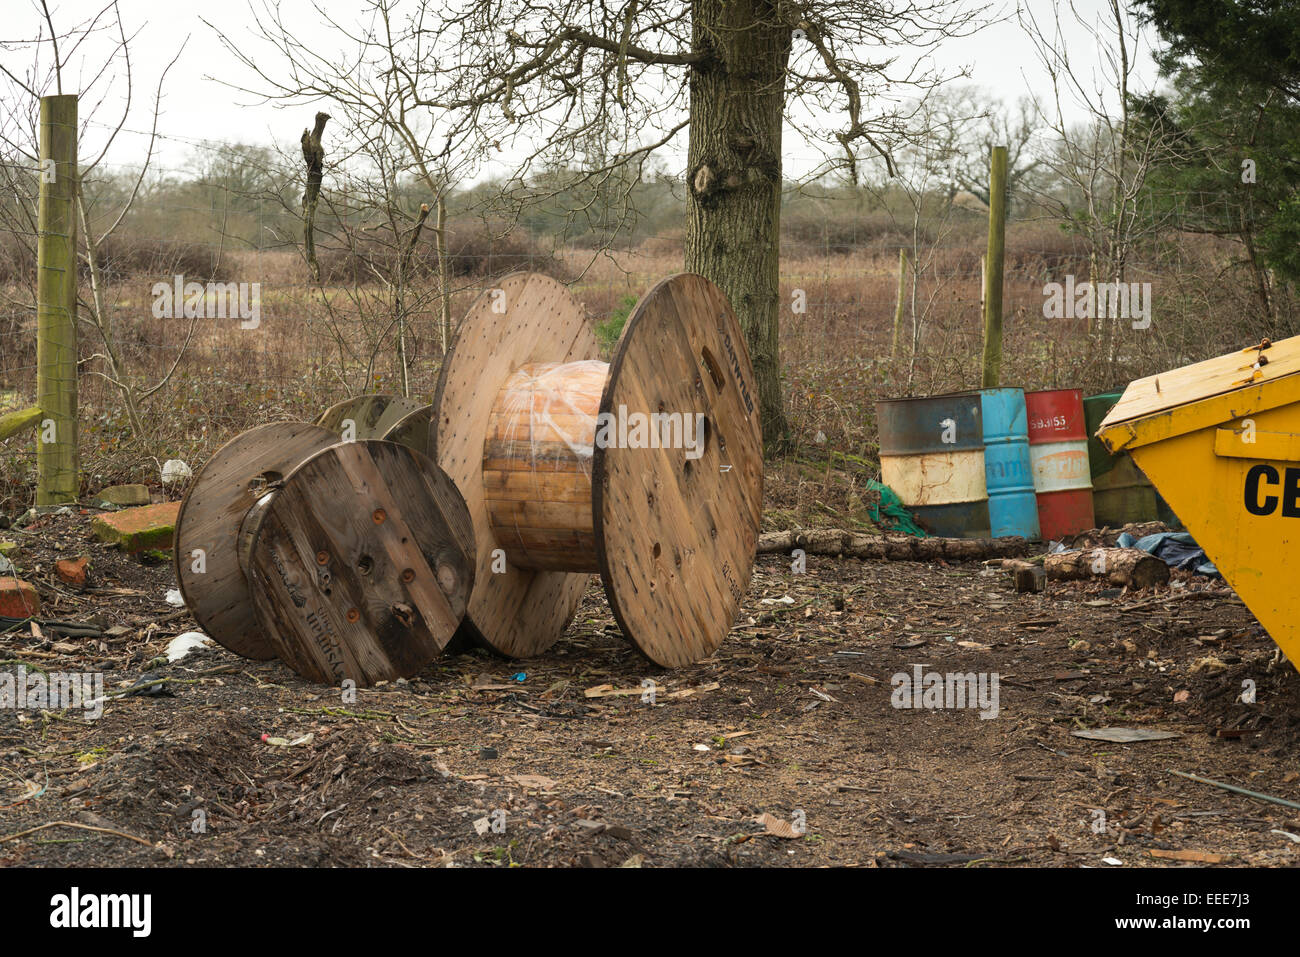 old cable reels & rusty oil drums in a wintry, rubbish strewn landscape. Stock Photo